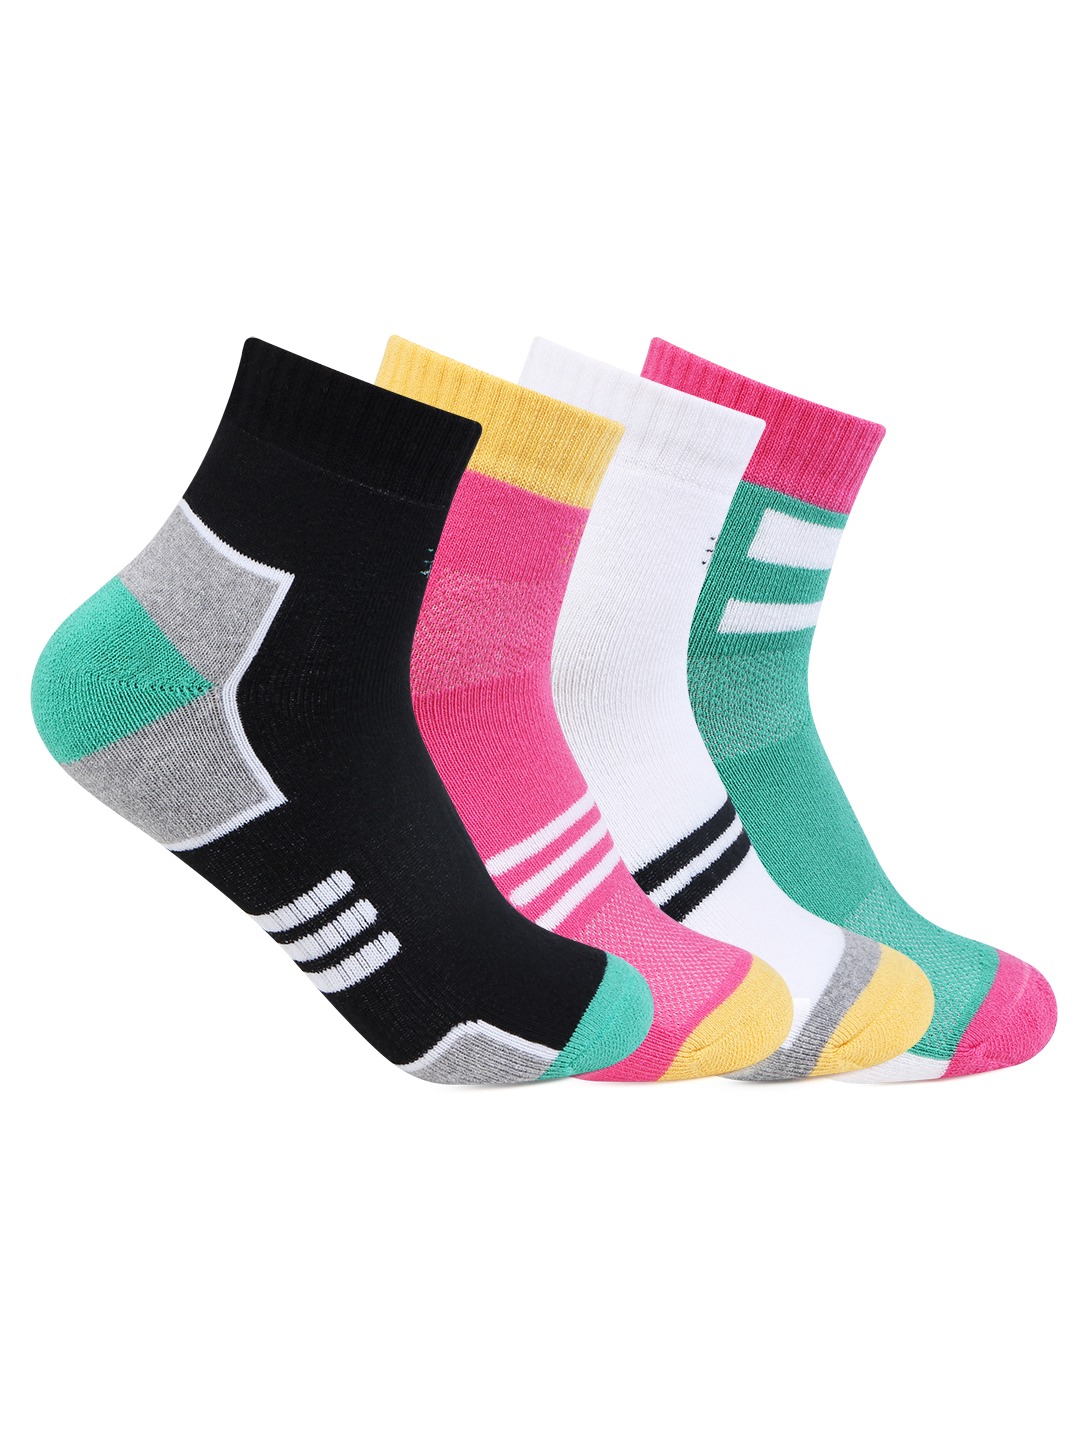 Accessories Socks | Bonjour Women Pack Of 4 Assorted Cushioned Above Ankle Length Sports Socks - ZE15427